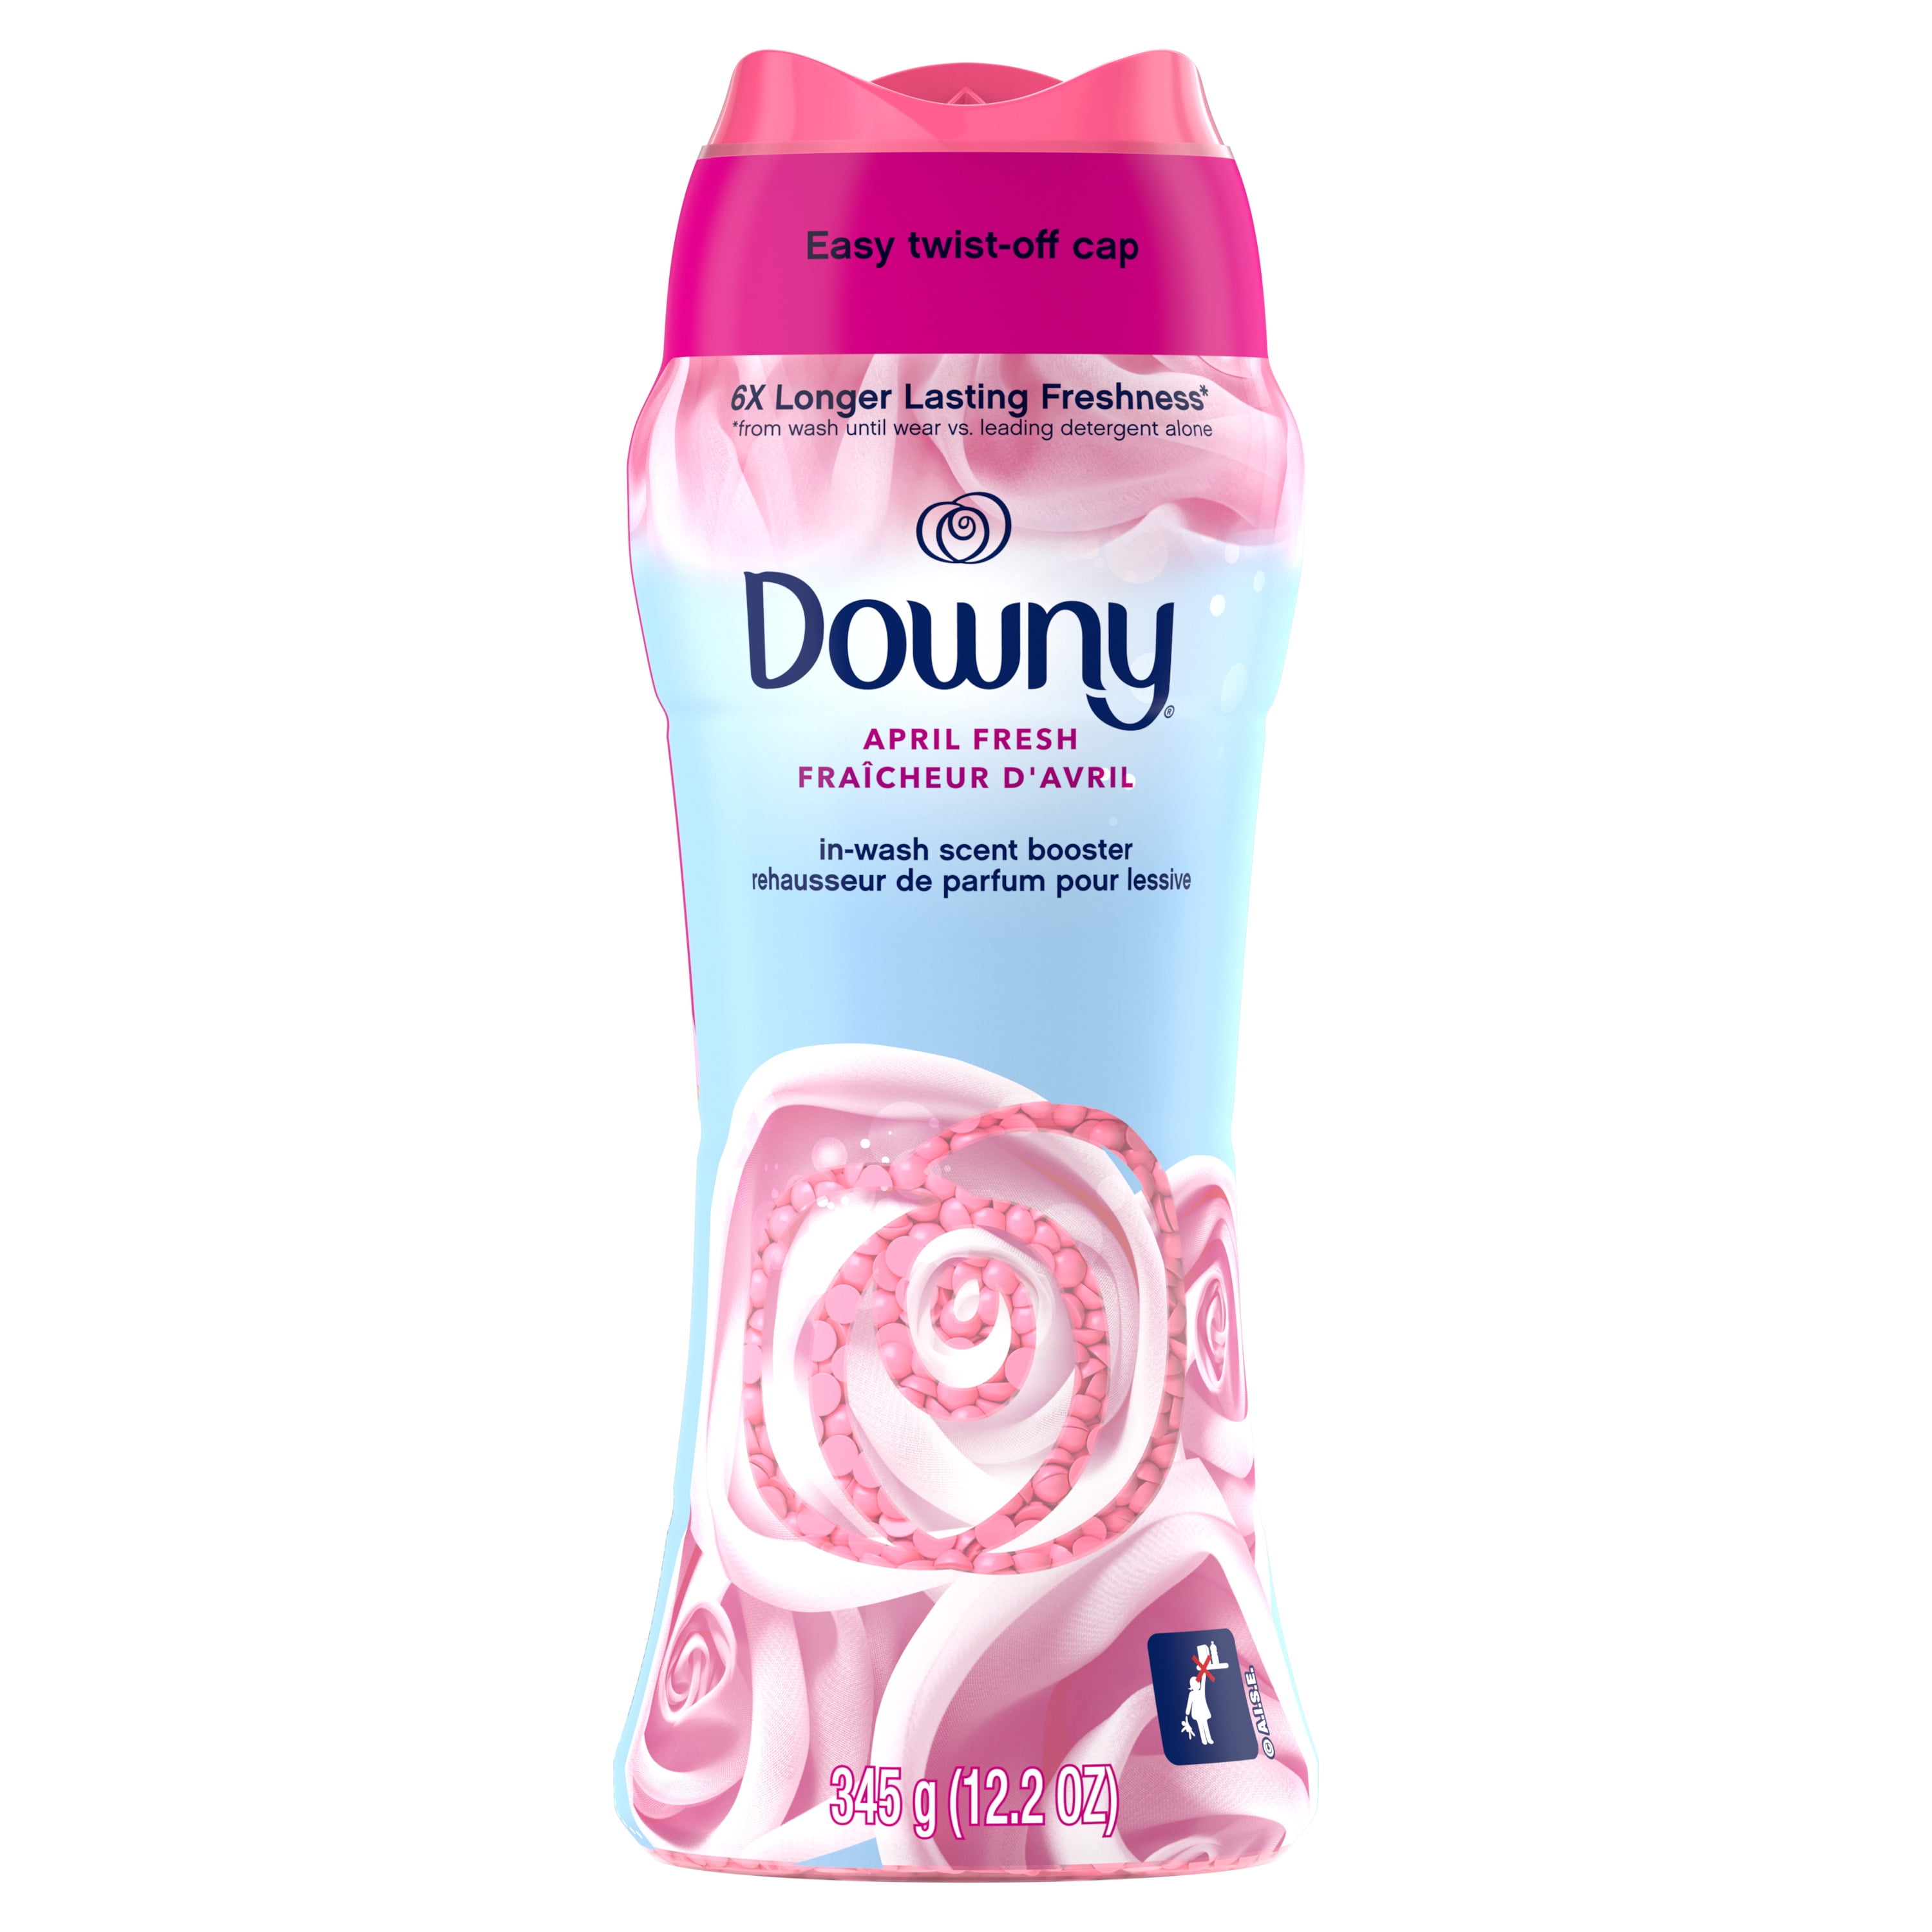 Downy Unstopables Cool Cotton In-Wash Scent Booster Beads, 18.2 oz